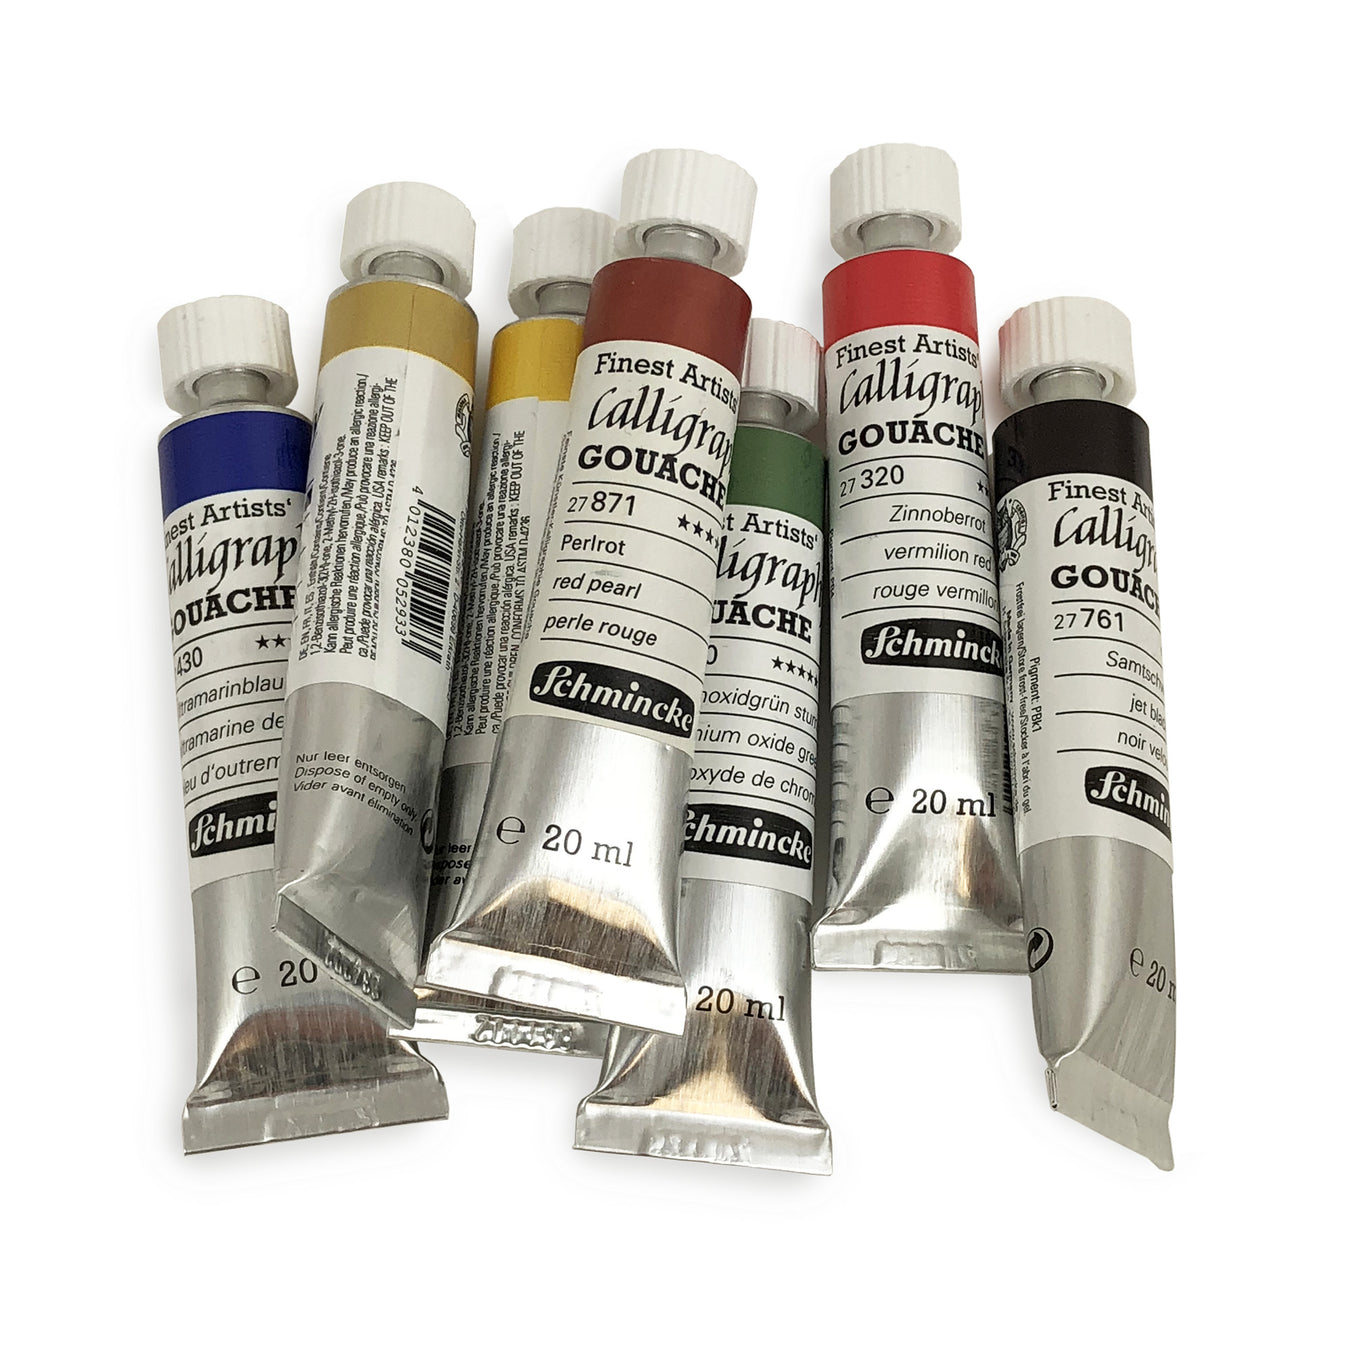 A selection of Calligraphy Paints & Brushes from Scribblers Calligraphy